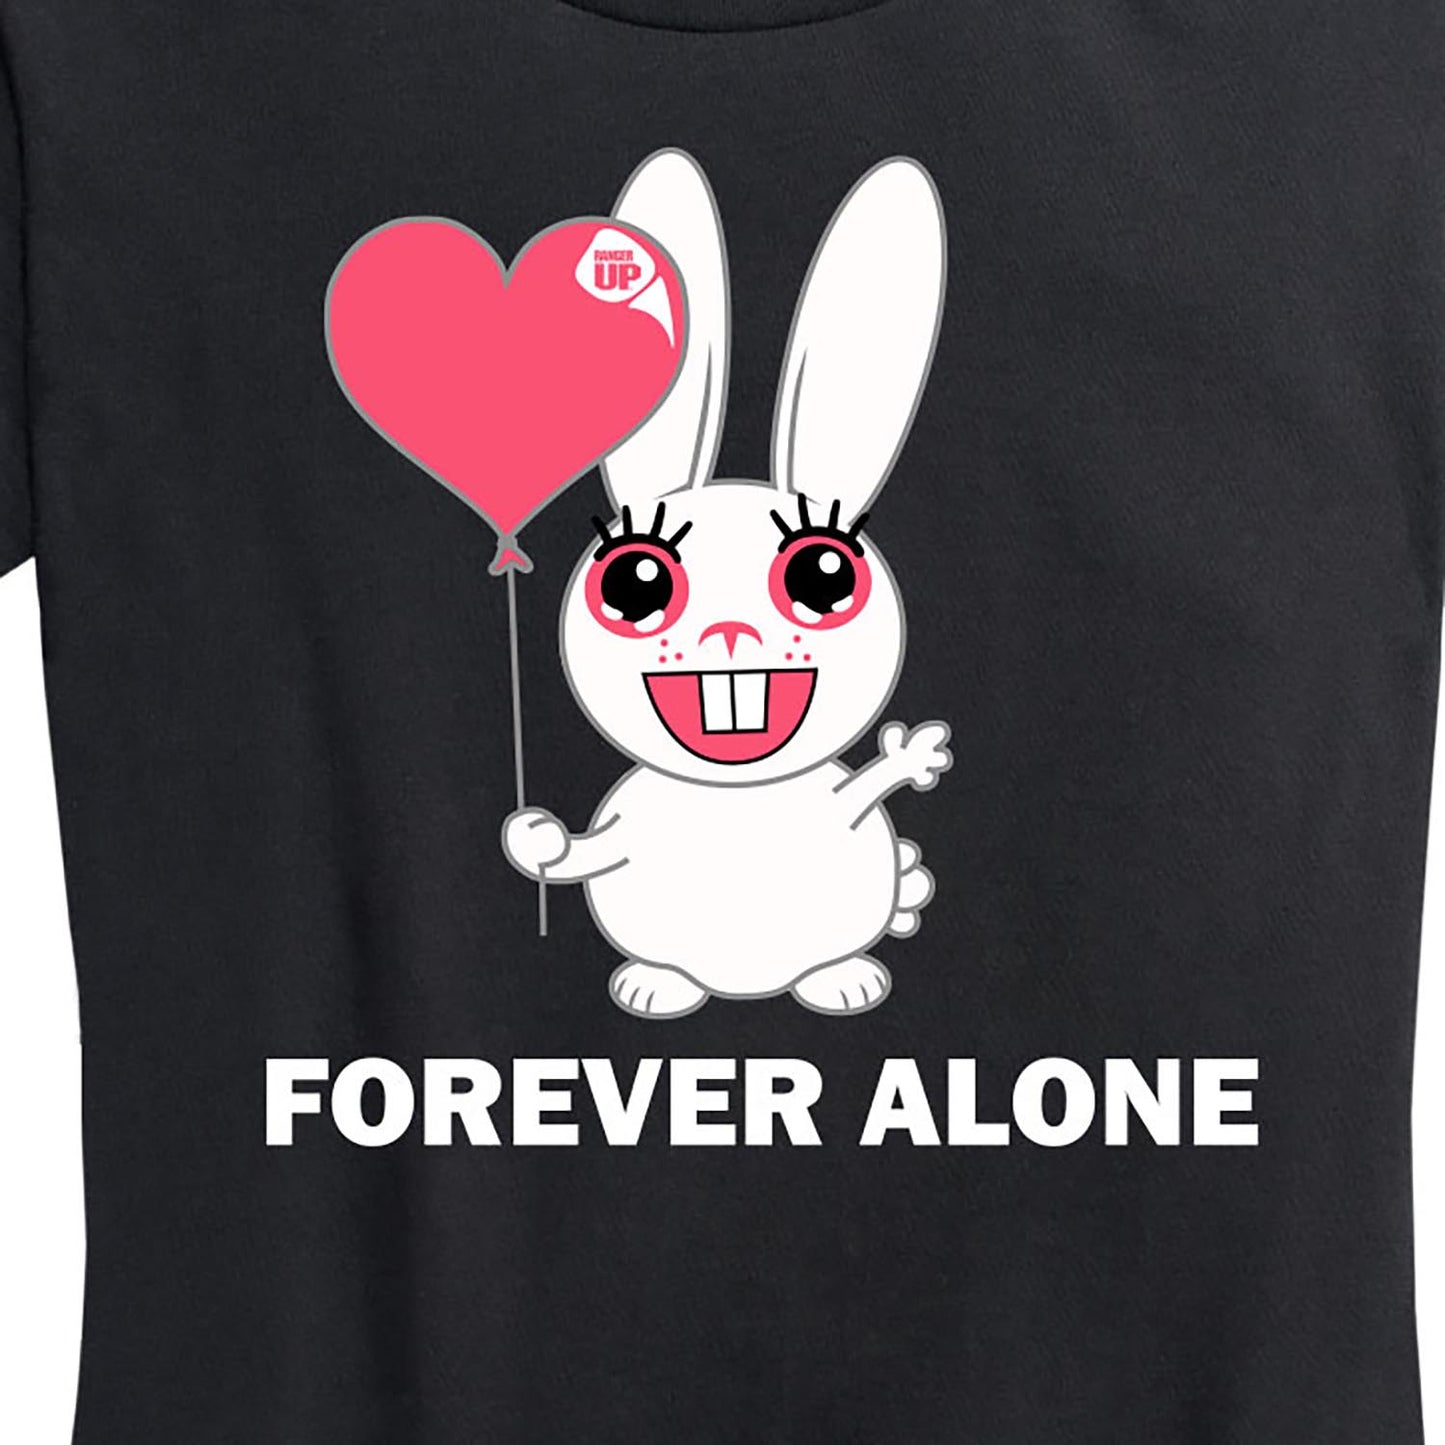 Women's Forever Alone Tee